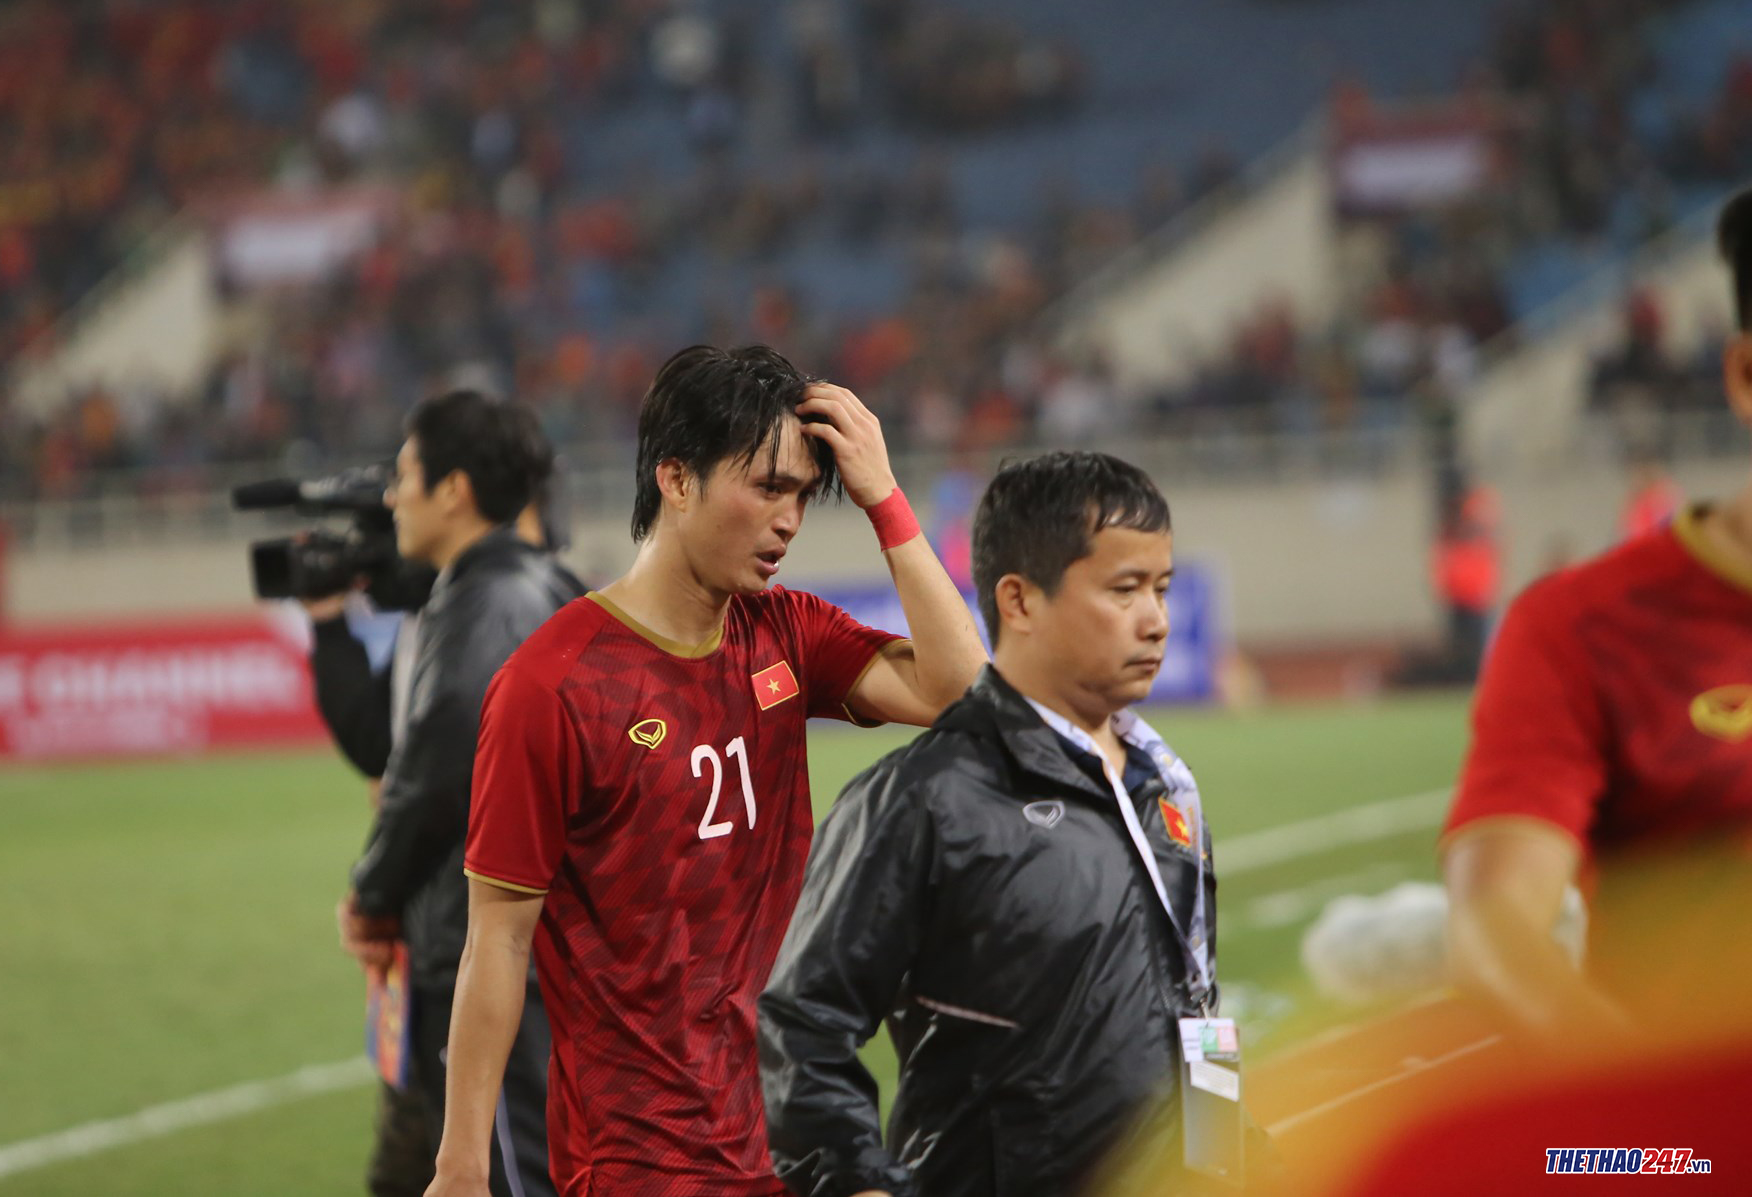 Tuan Anh was invited to Alaves for a trial.